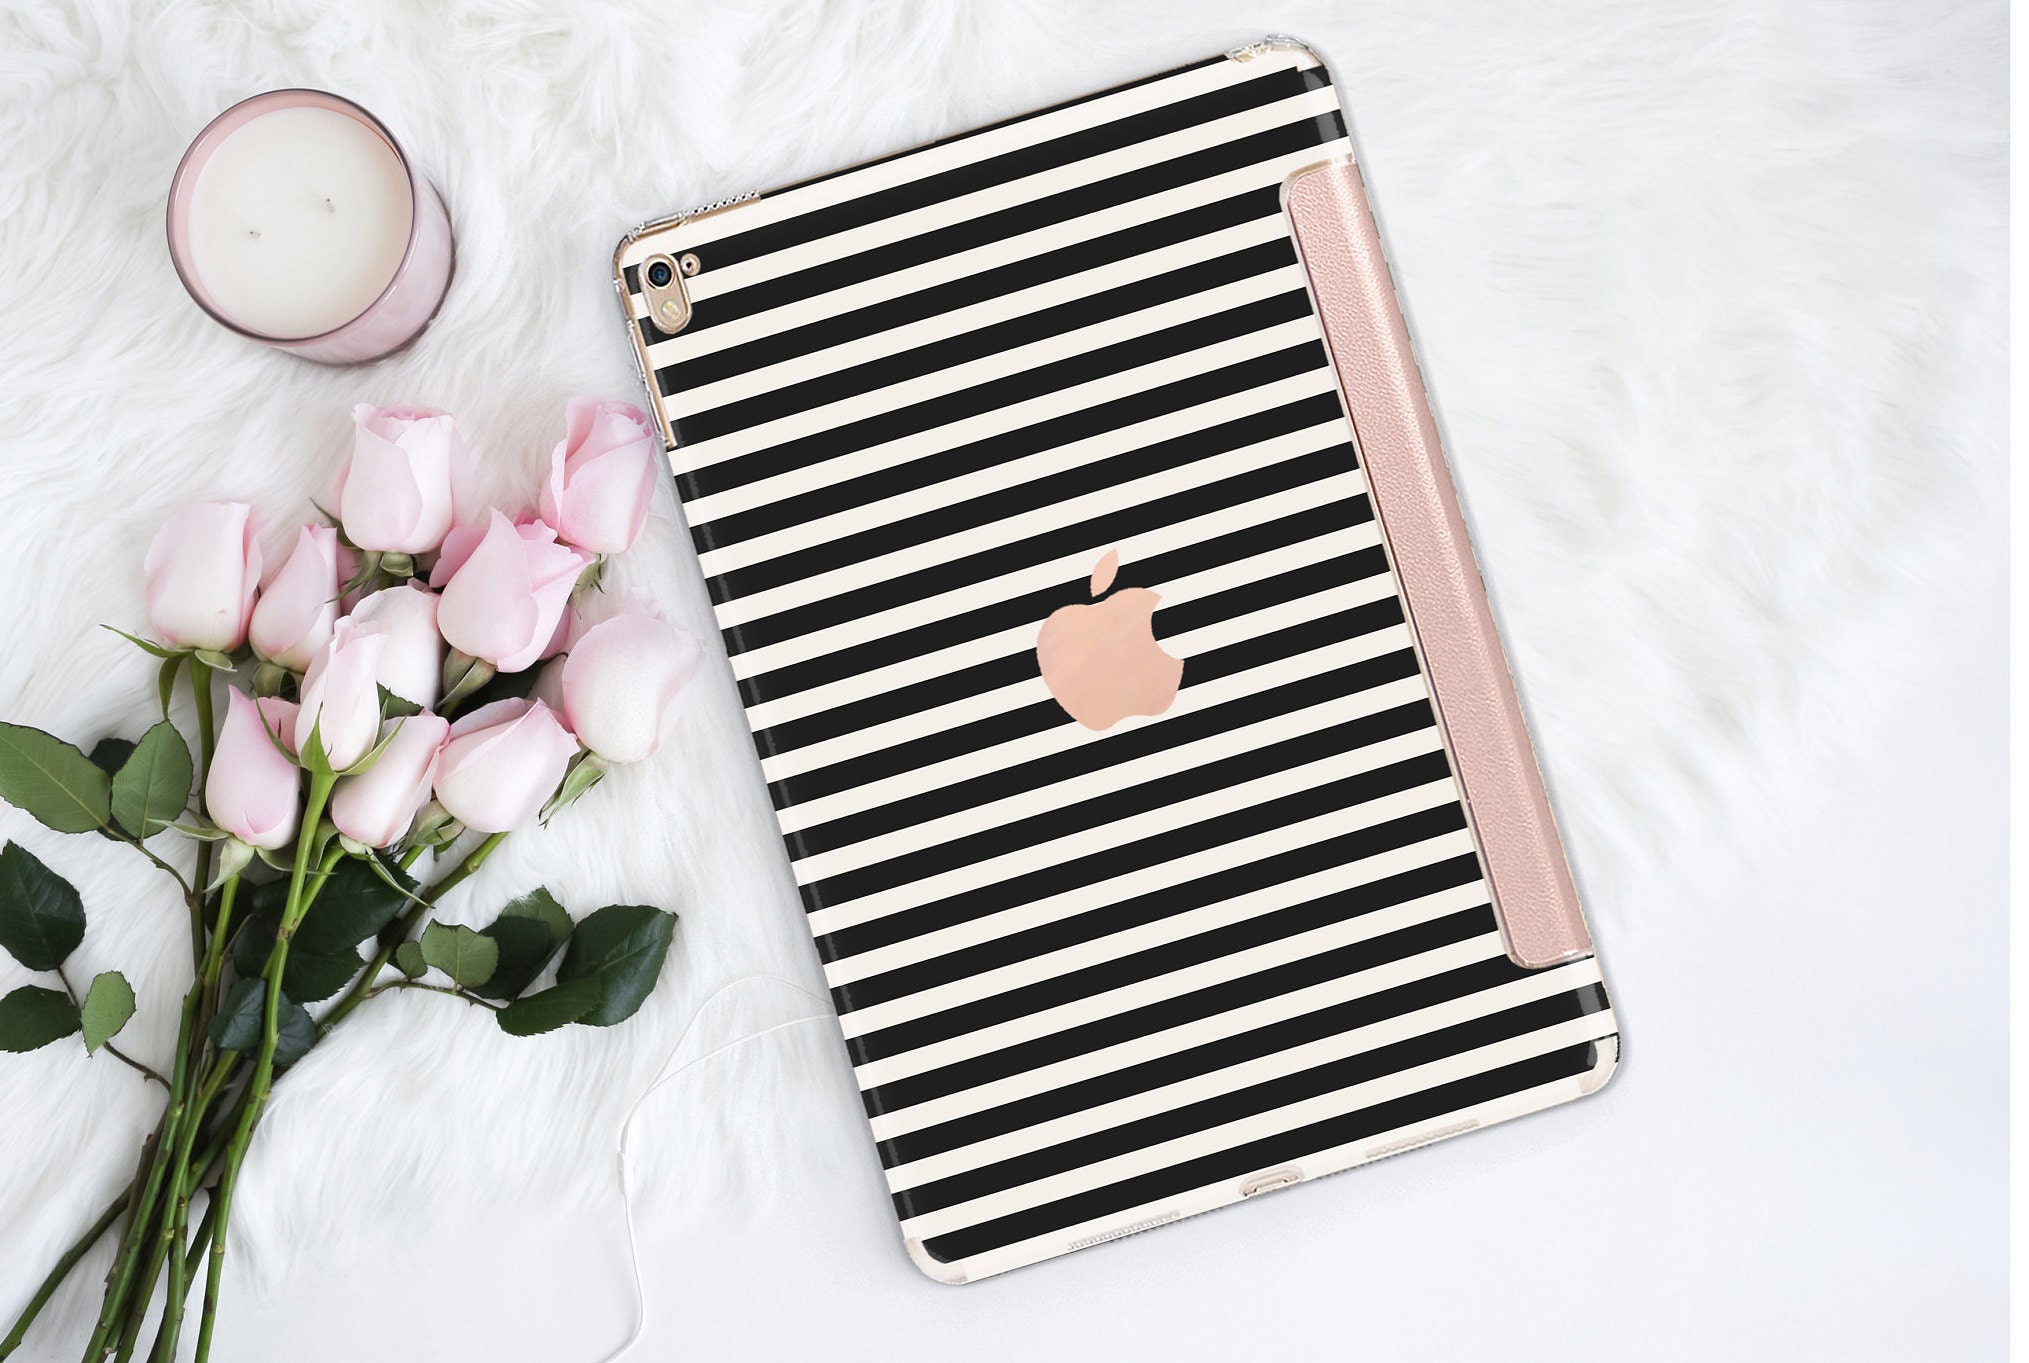 Black Stripes With Rose Gold Smart Cover Hard Case . . Ipad - Etsy